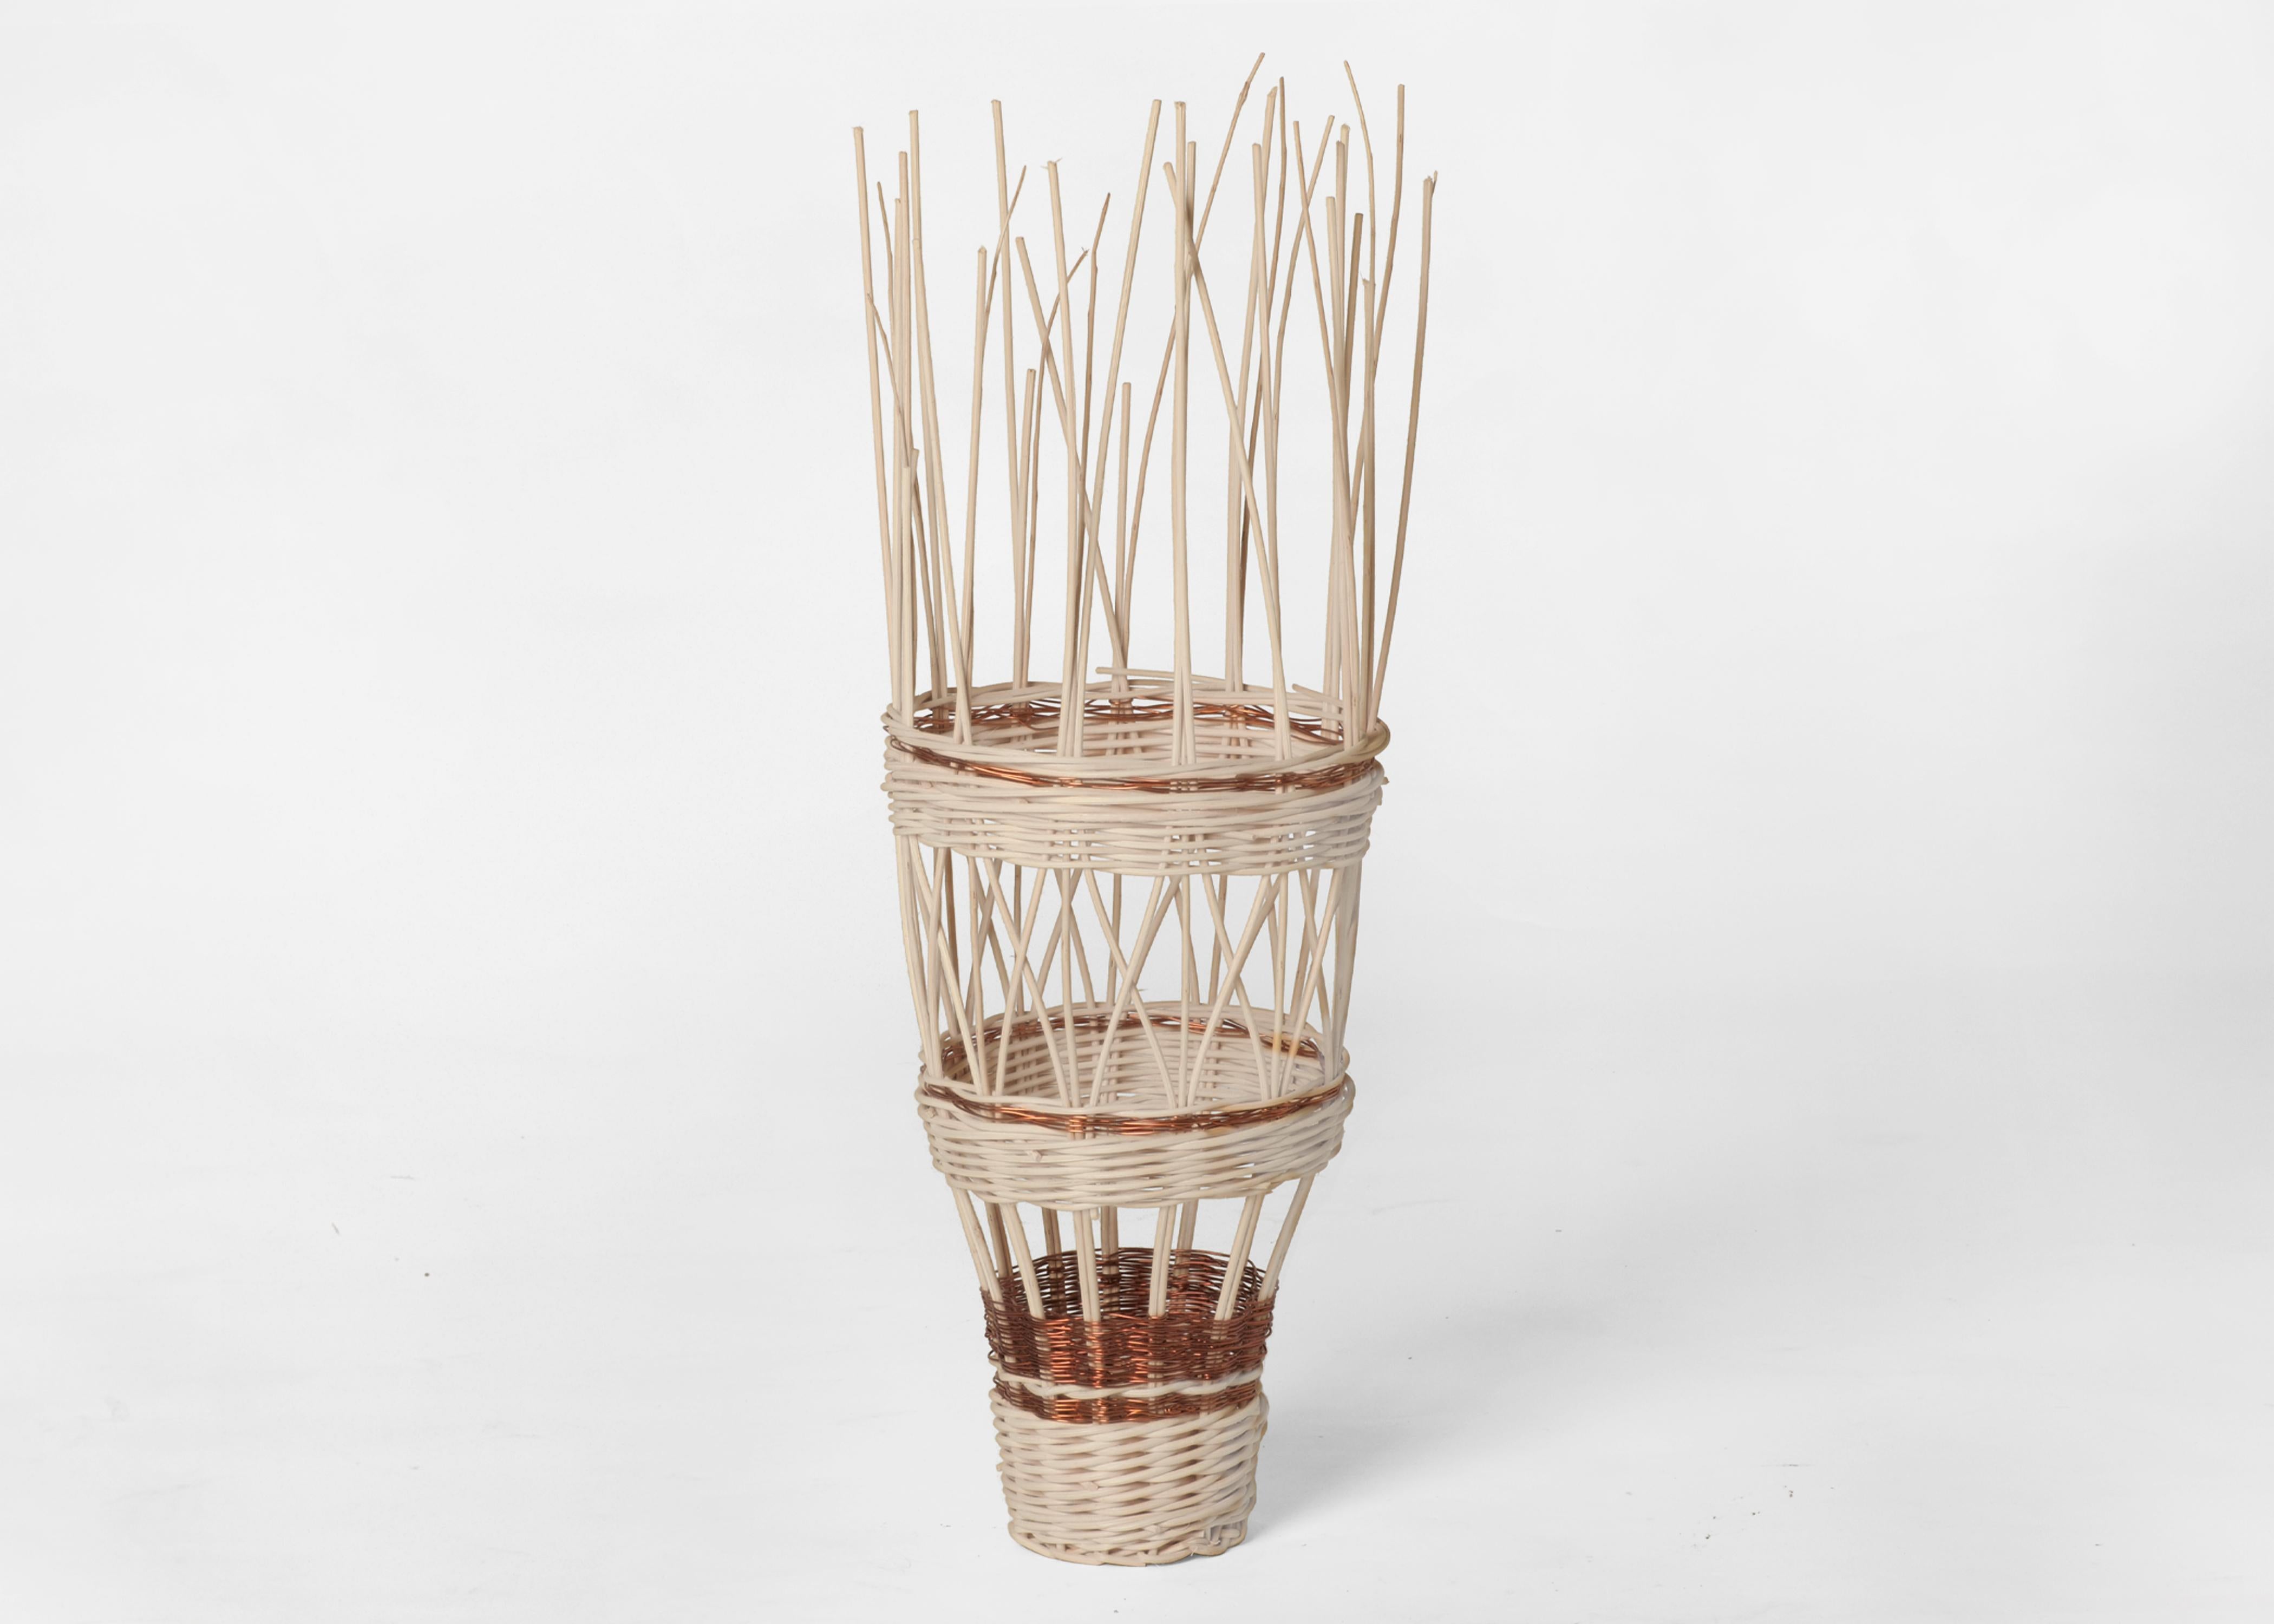 Small voodoo basket by Edizione Limitata
Limited Edition. Signed and numbered.
Designers: Simone Fanciullacci
Dimensions: H 55× W 18× L 18 cm
Materials: Handwoven rattan, copper wire

Edizione Limitata, that is to say “Limited Edition”, is a brand